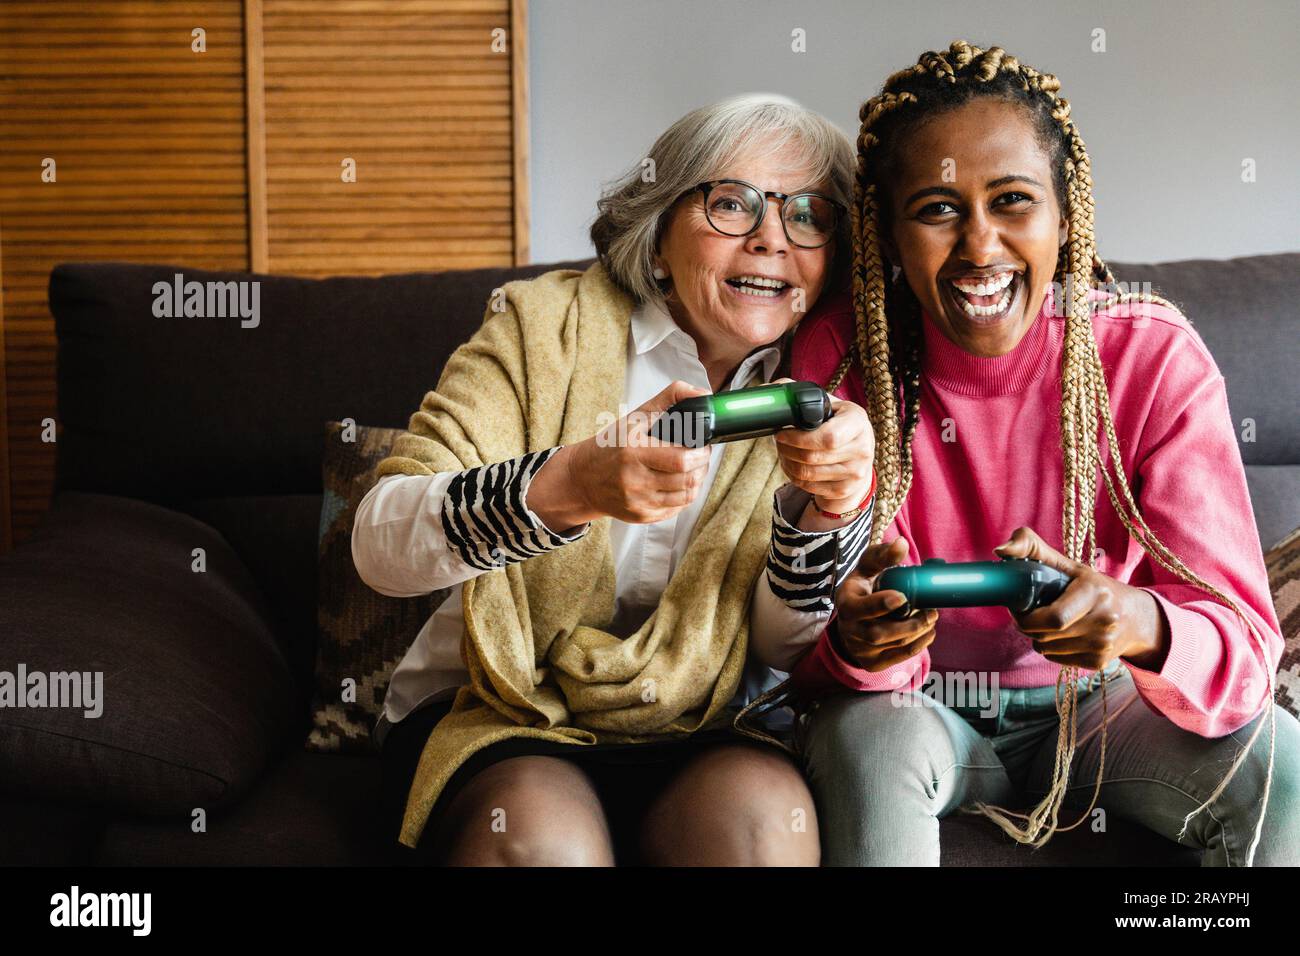 Happy multi generational women having fun playing video games together at home Stock Photo